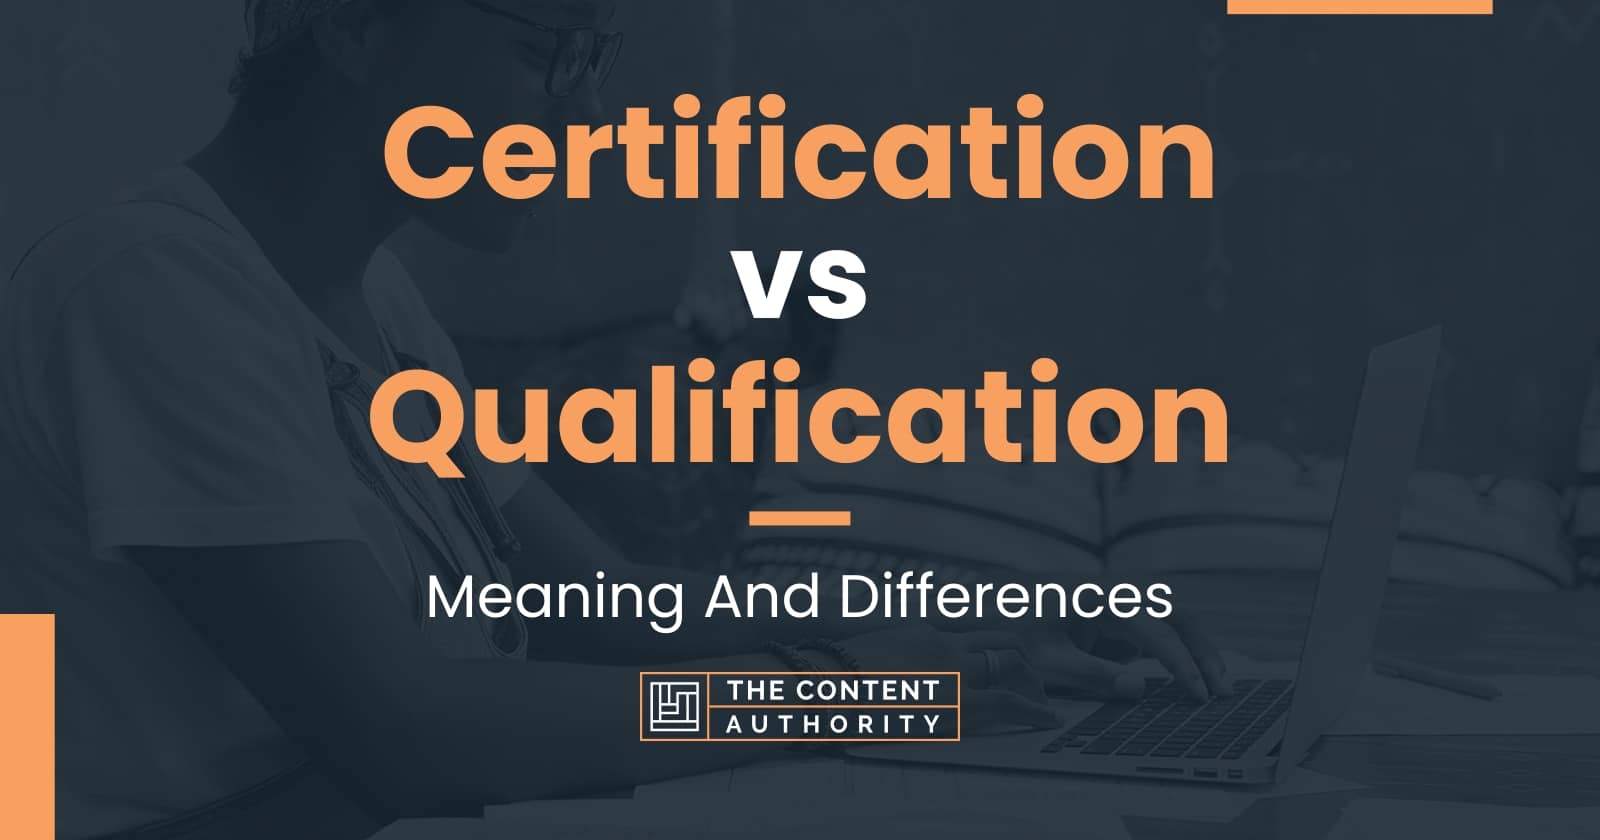 Certification vs Qualification: Meaning And Differences